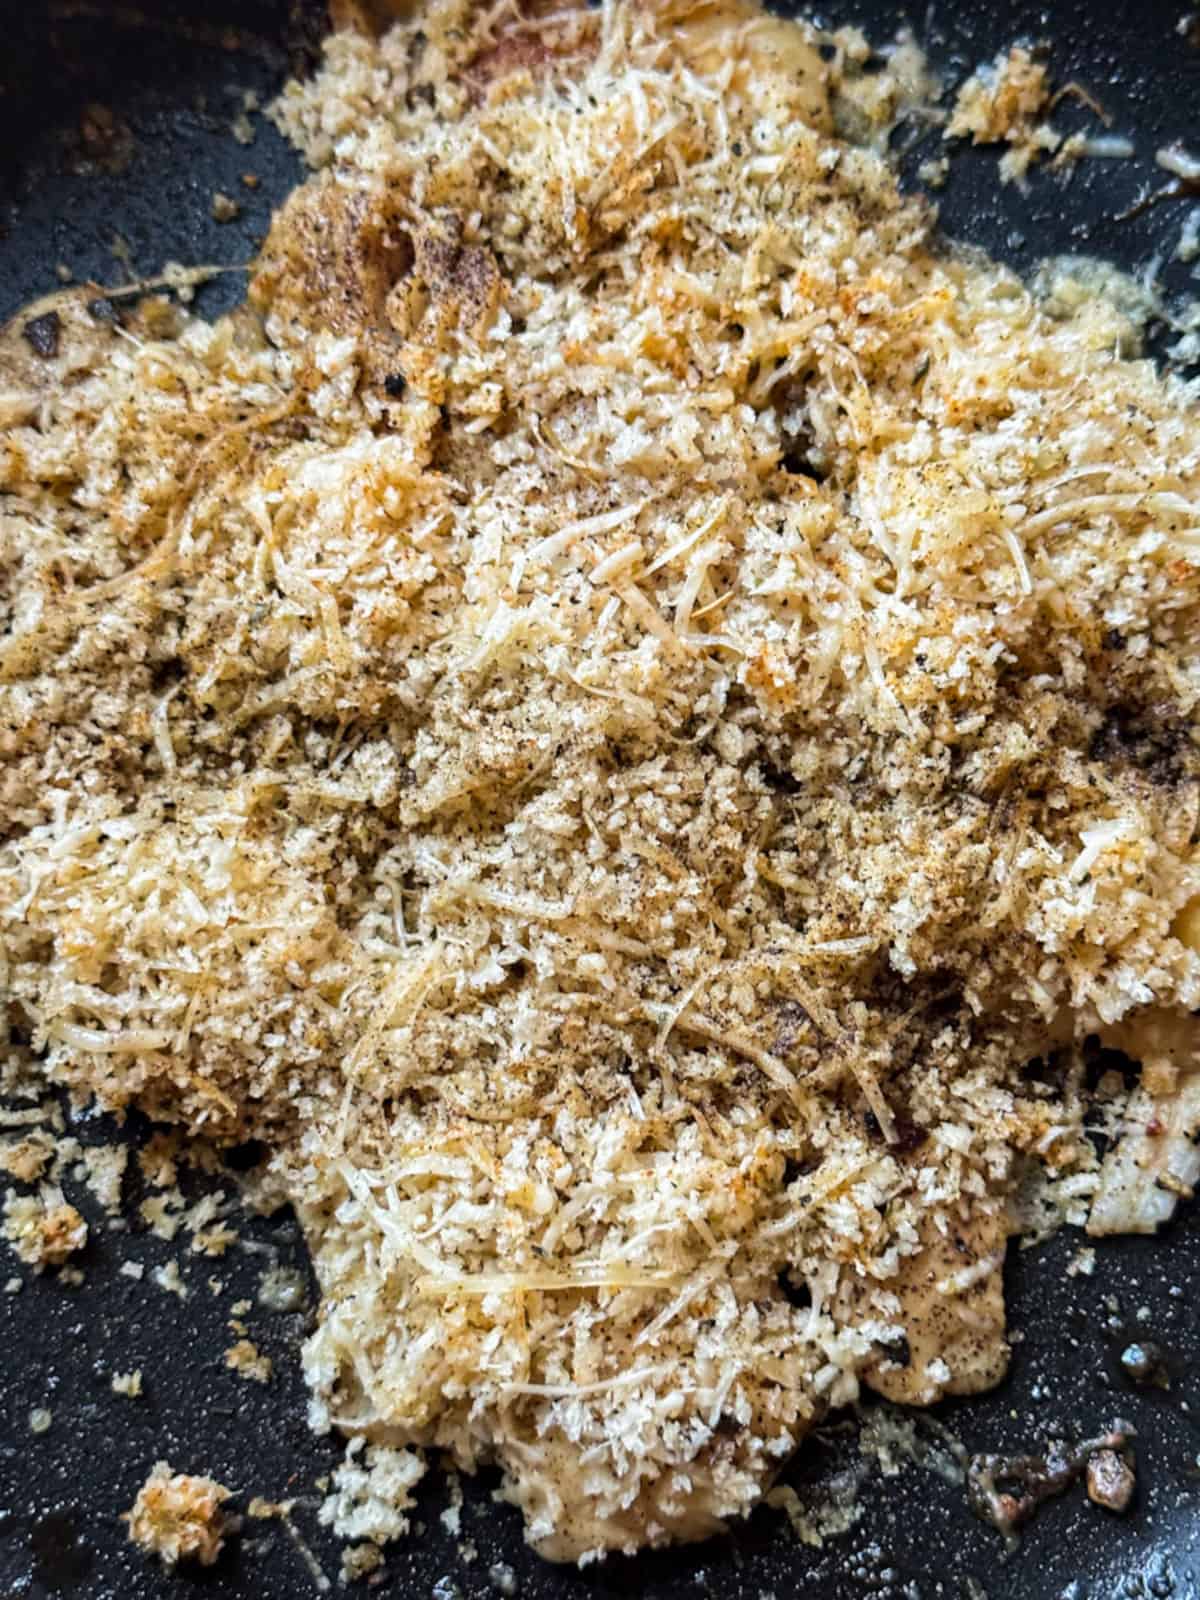 pollock fish generously covered with grated parmesan and panic seasoning mixture in a black frying pan